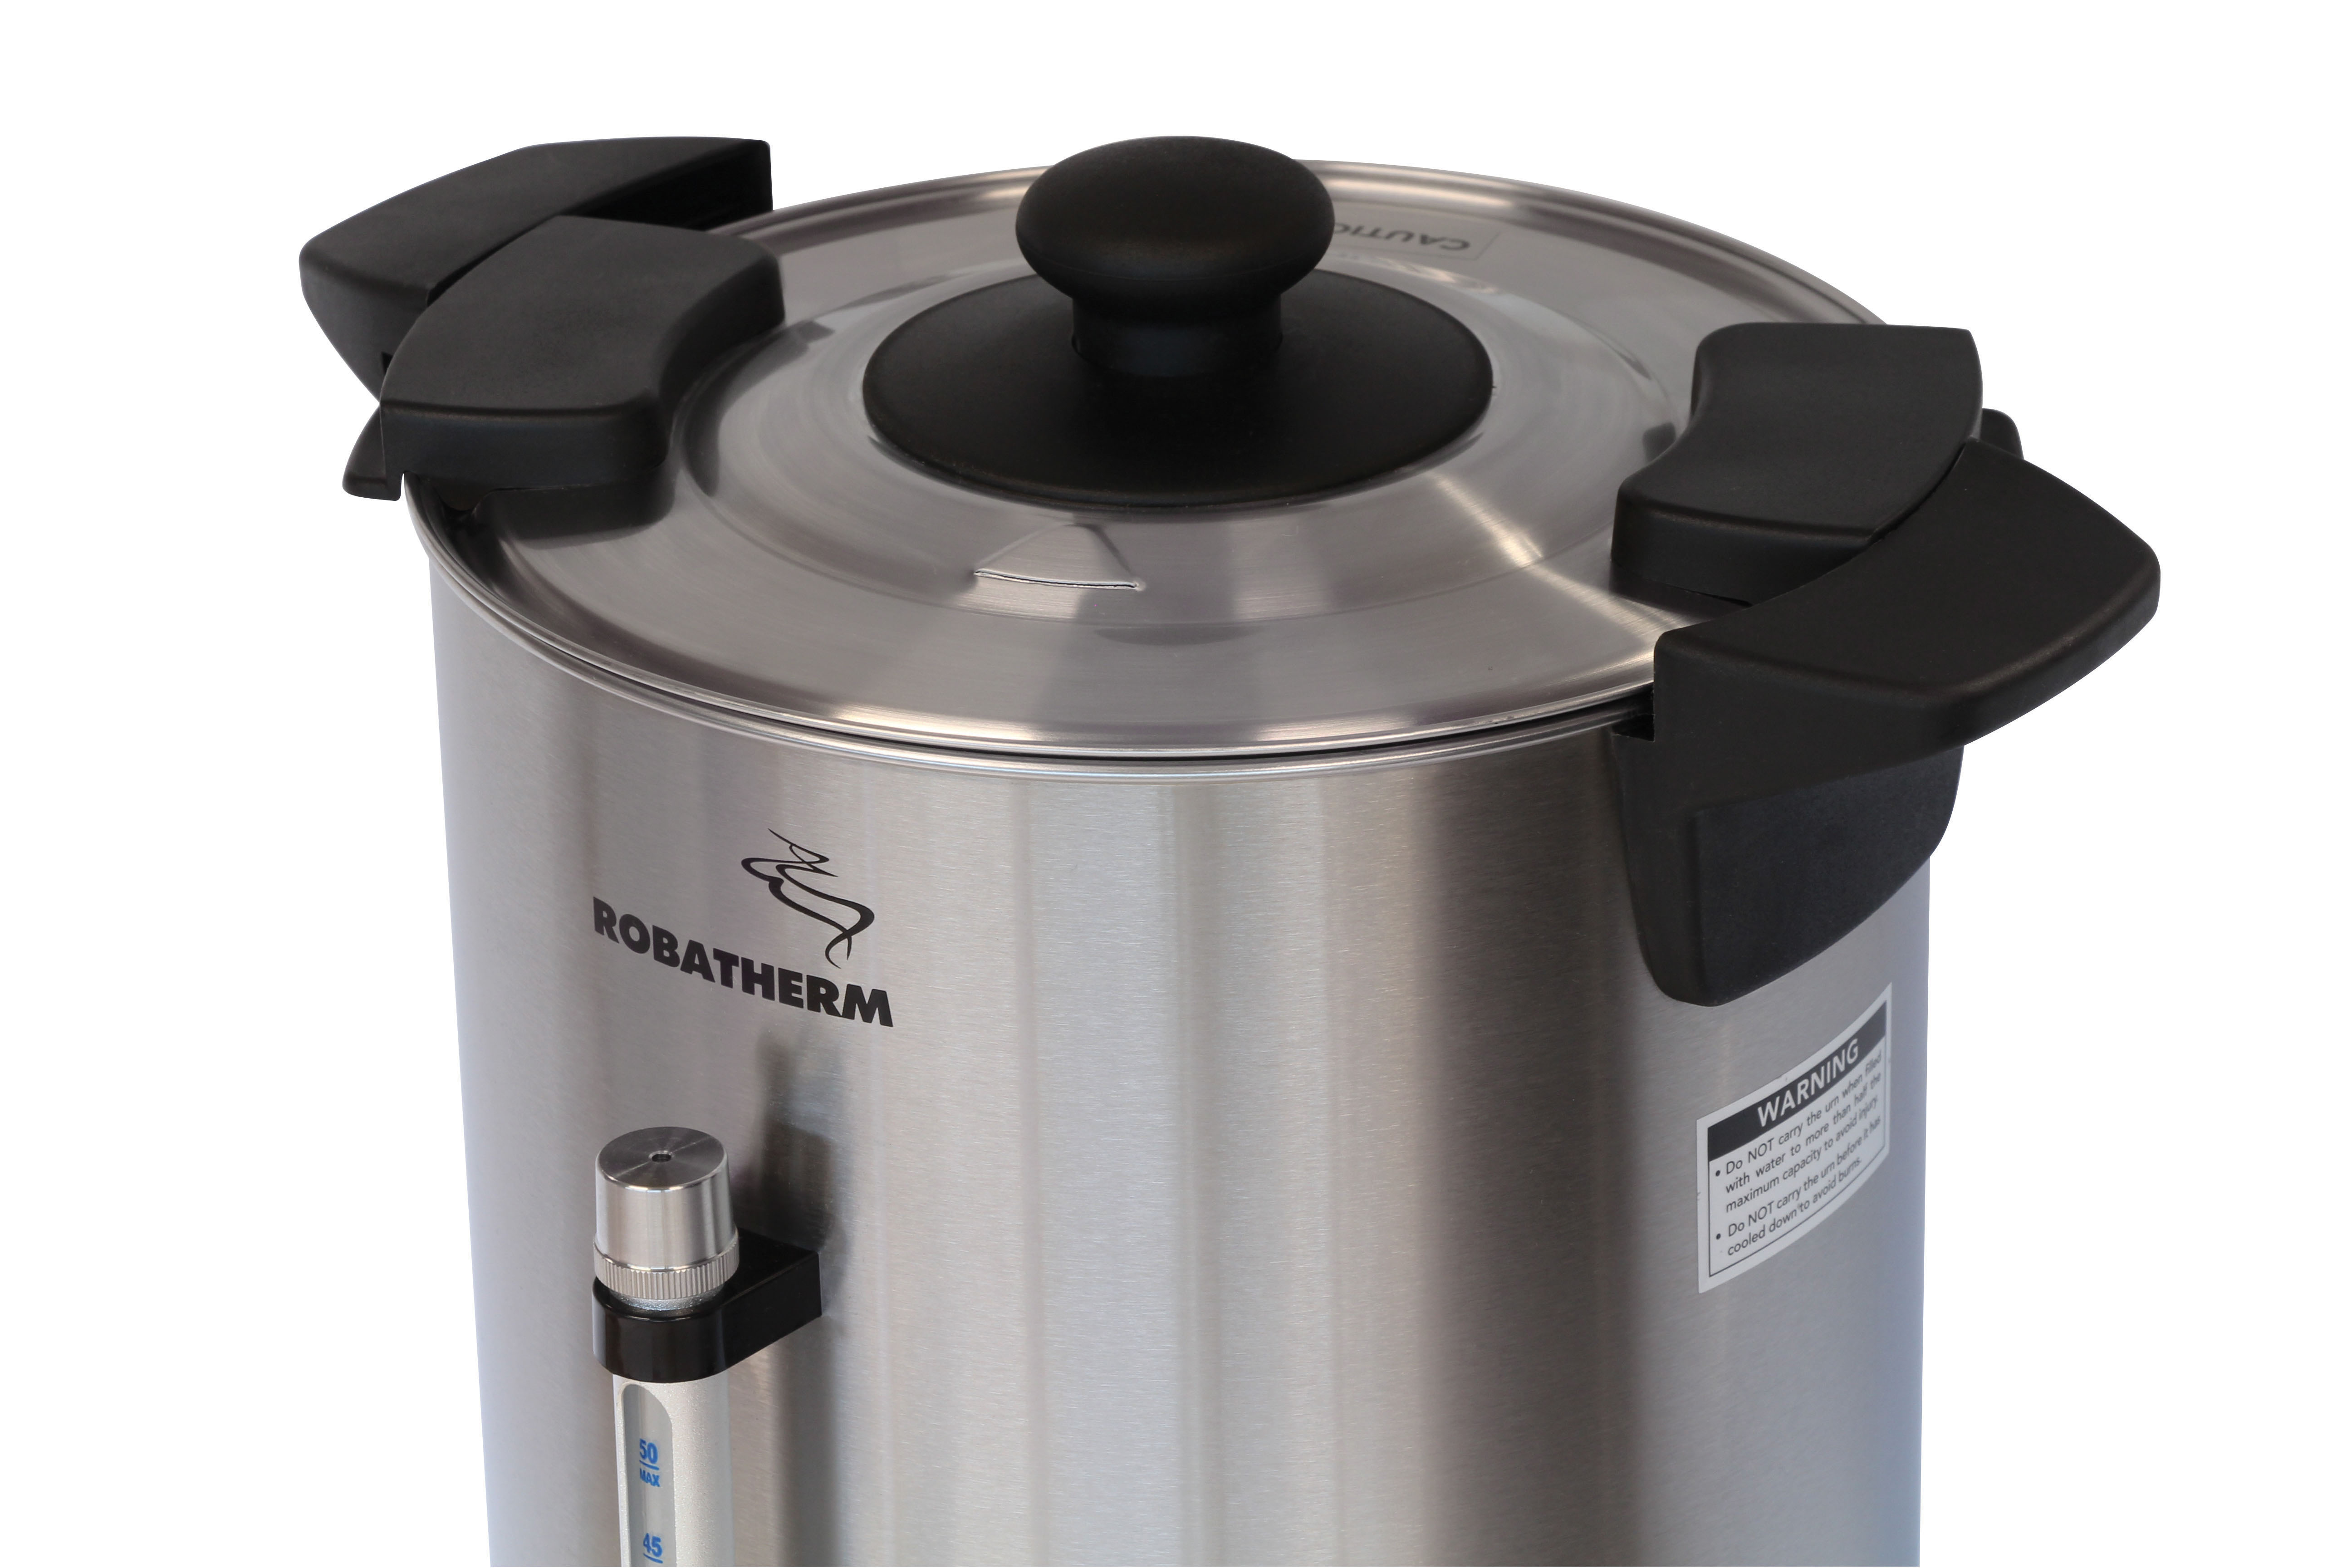 Top Premium Hot Water Urn s/steel with concealed element 70L 